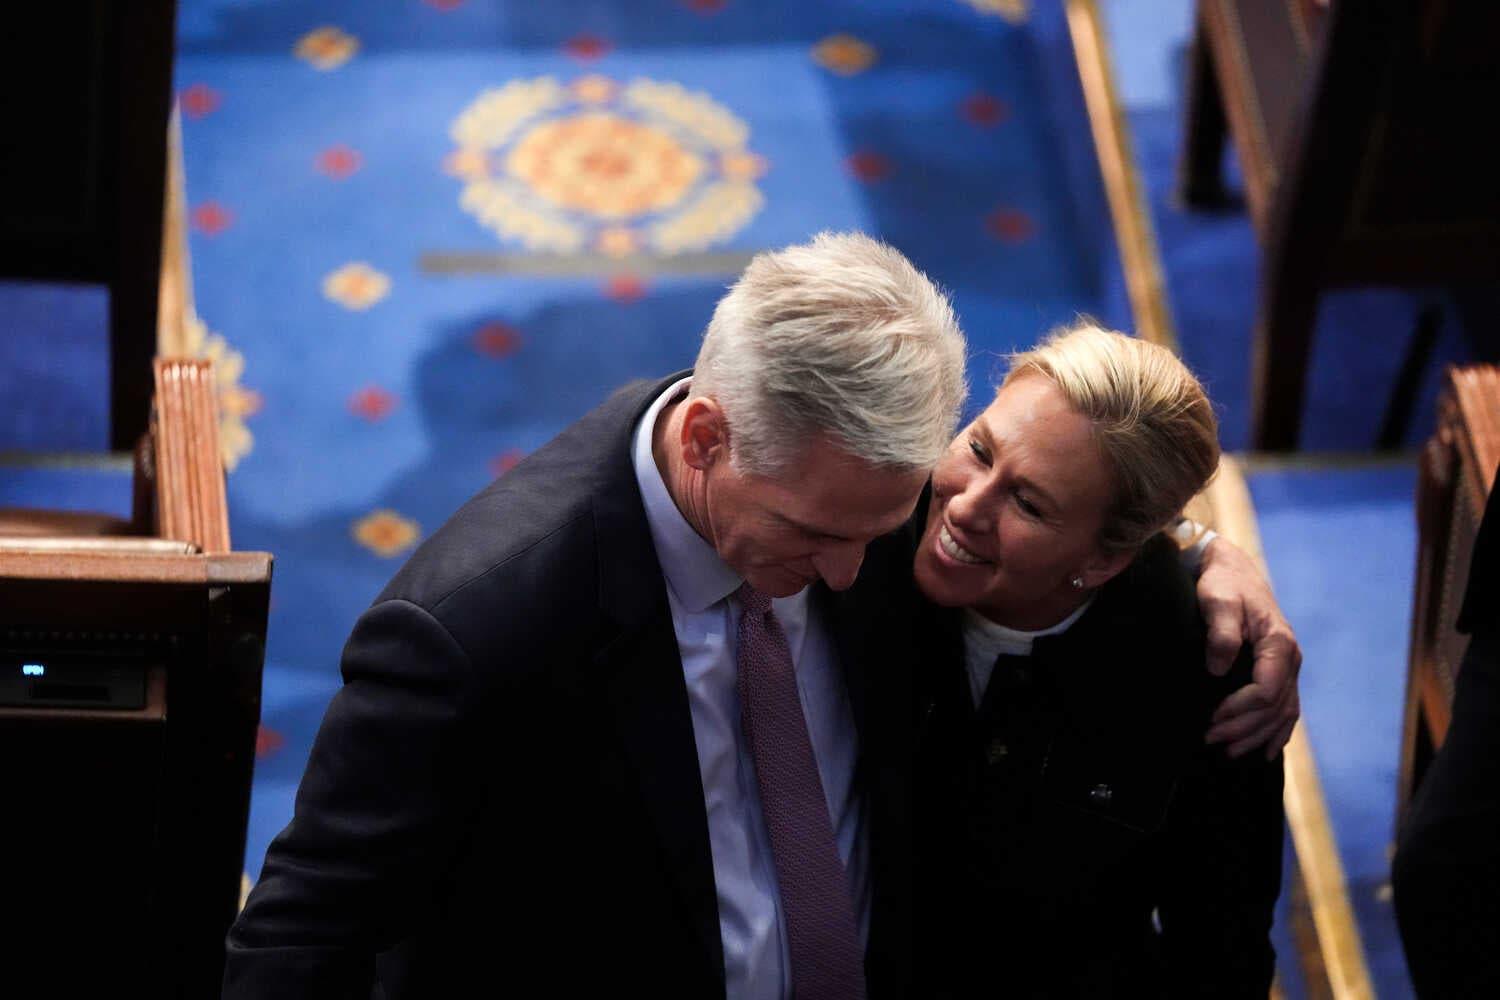 Representatives Kevin McCarthy and Marjorie Taylor Greene embracing at the Capitol.